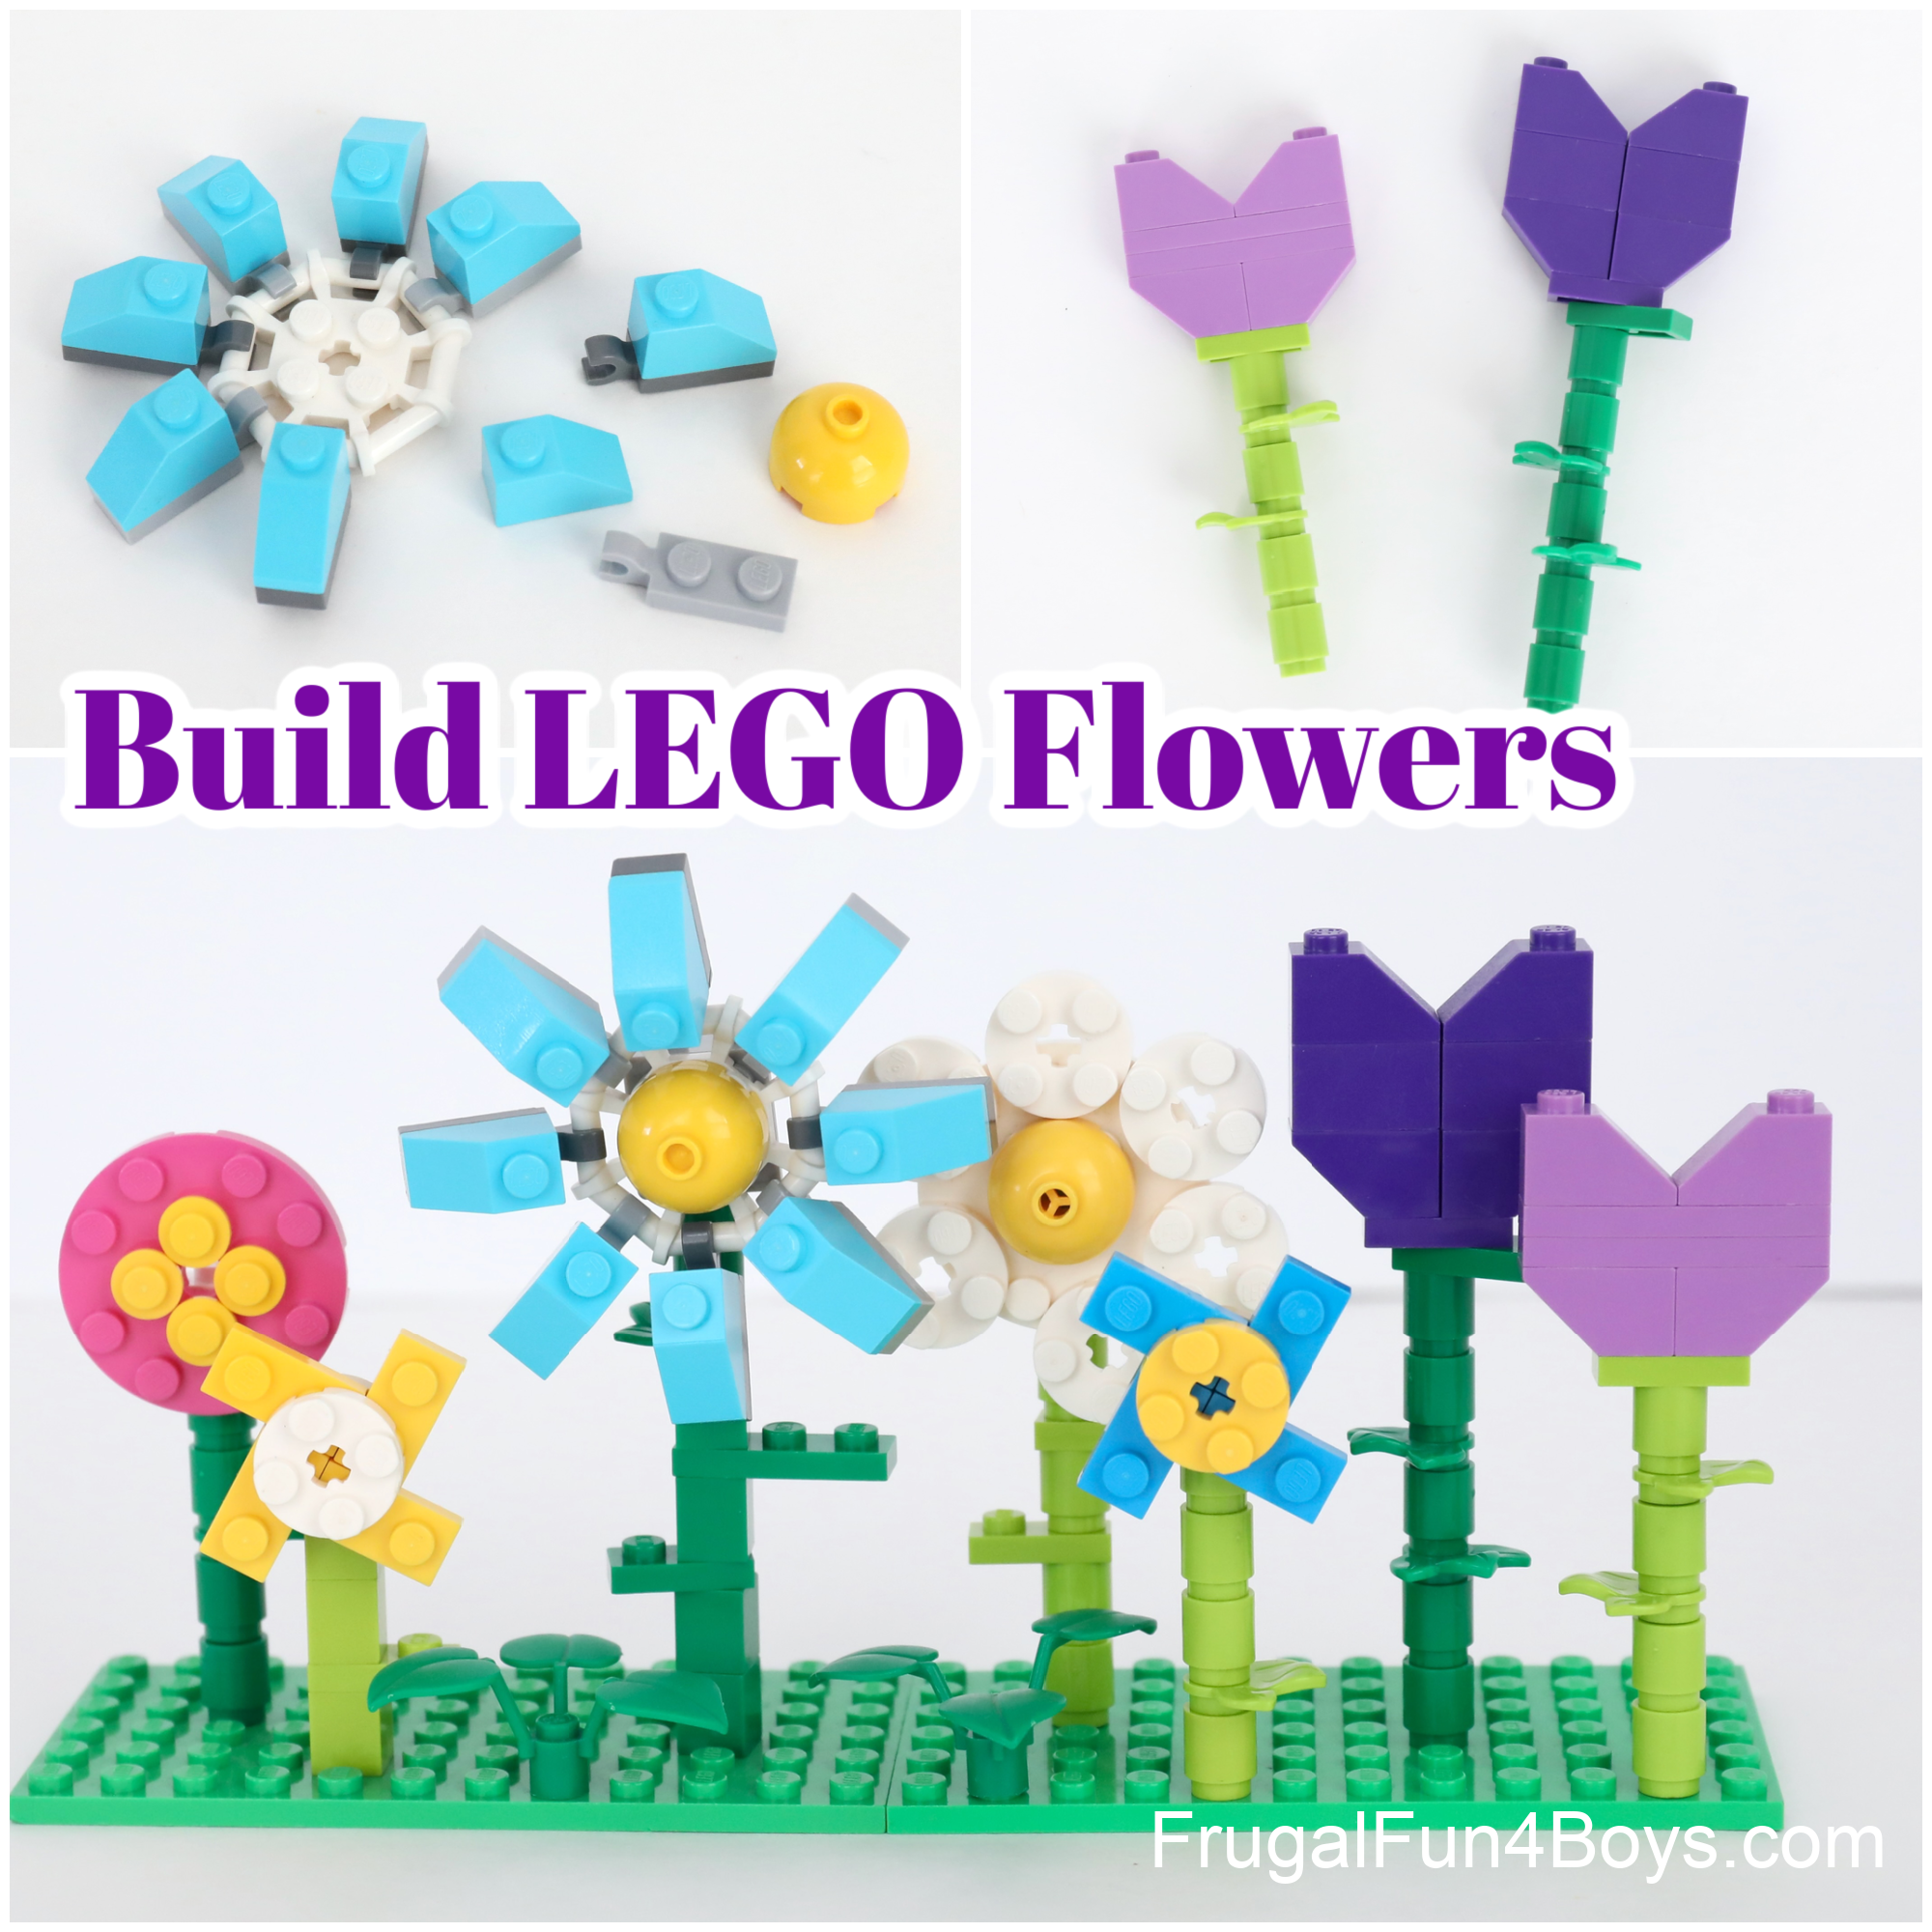 Build LEGO Flowers - Frugal Fun For Boys and Girls